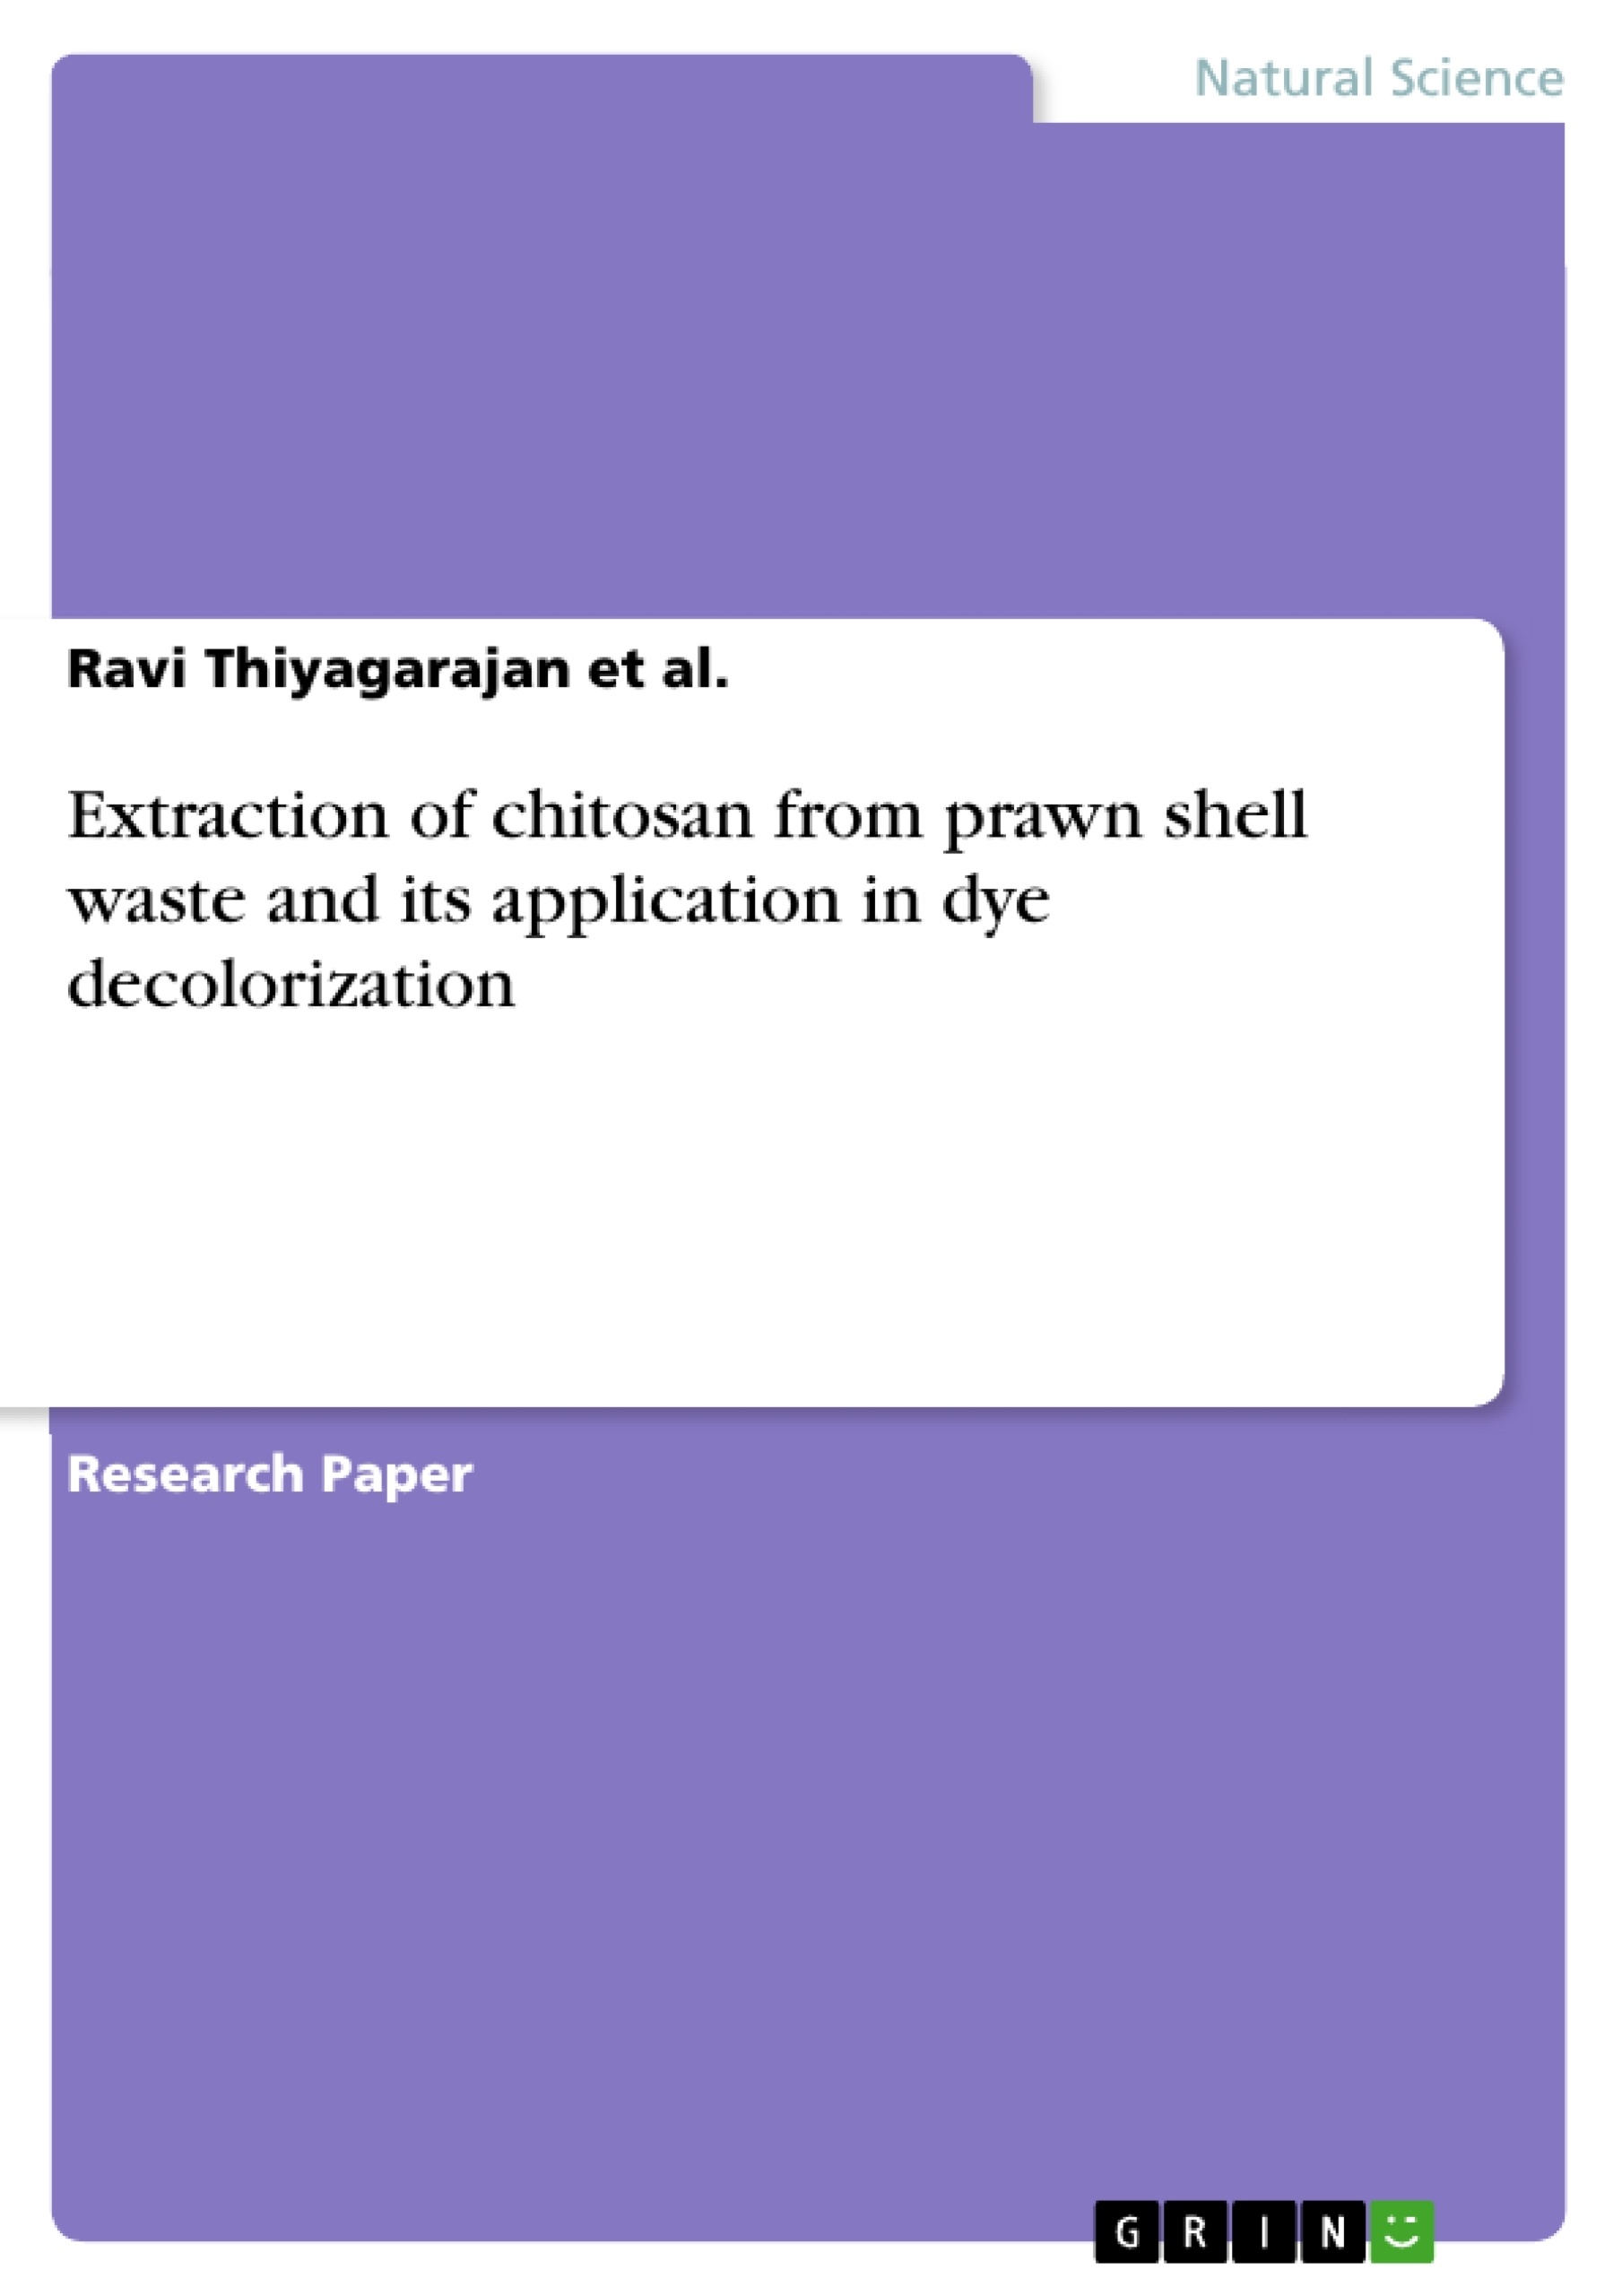 Titre: Extraction of chitosan from prawn shell waste and its application in dye decolorization